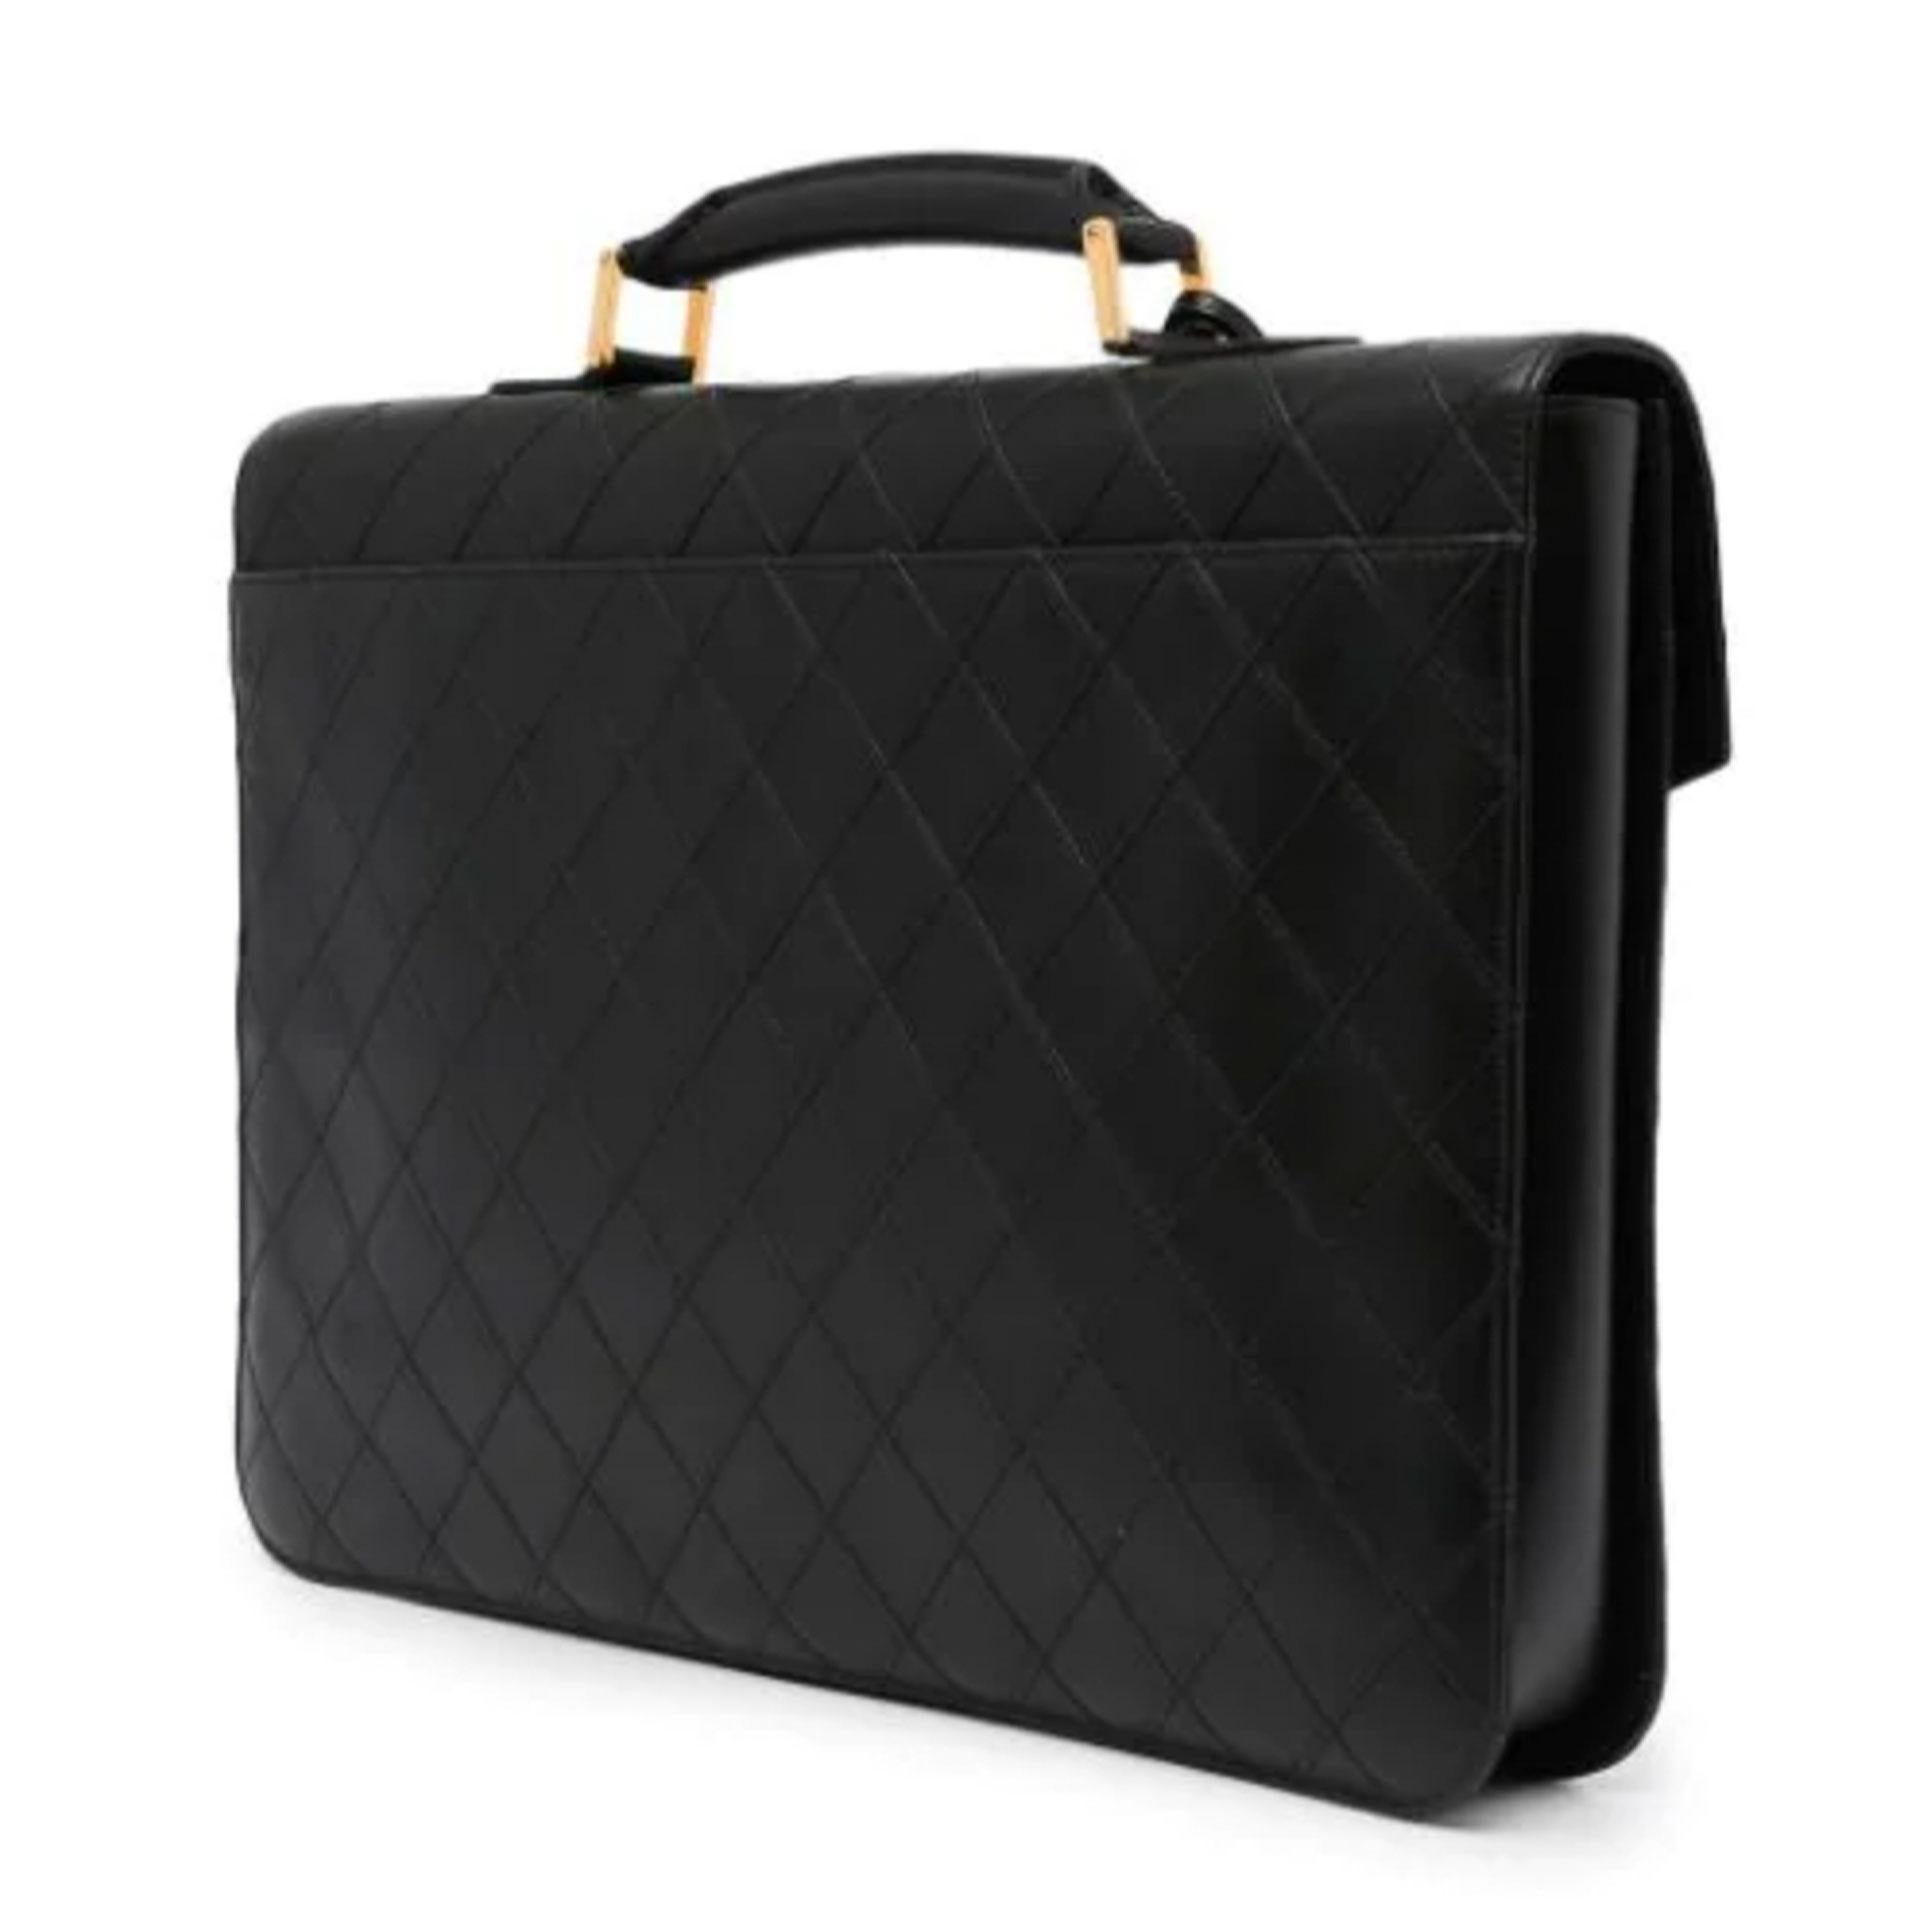 Chanel Vintage Black Diamond Quilted Work Laptop Briefcase Bag 

circa 1992
black
lambskin
diamond quilting
single flat top handle
front flap closure
push-lock fastening
main compartment
internal slip pocket
internal logo stamp
slip pocket to the